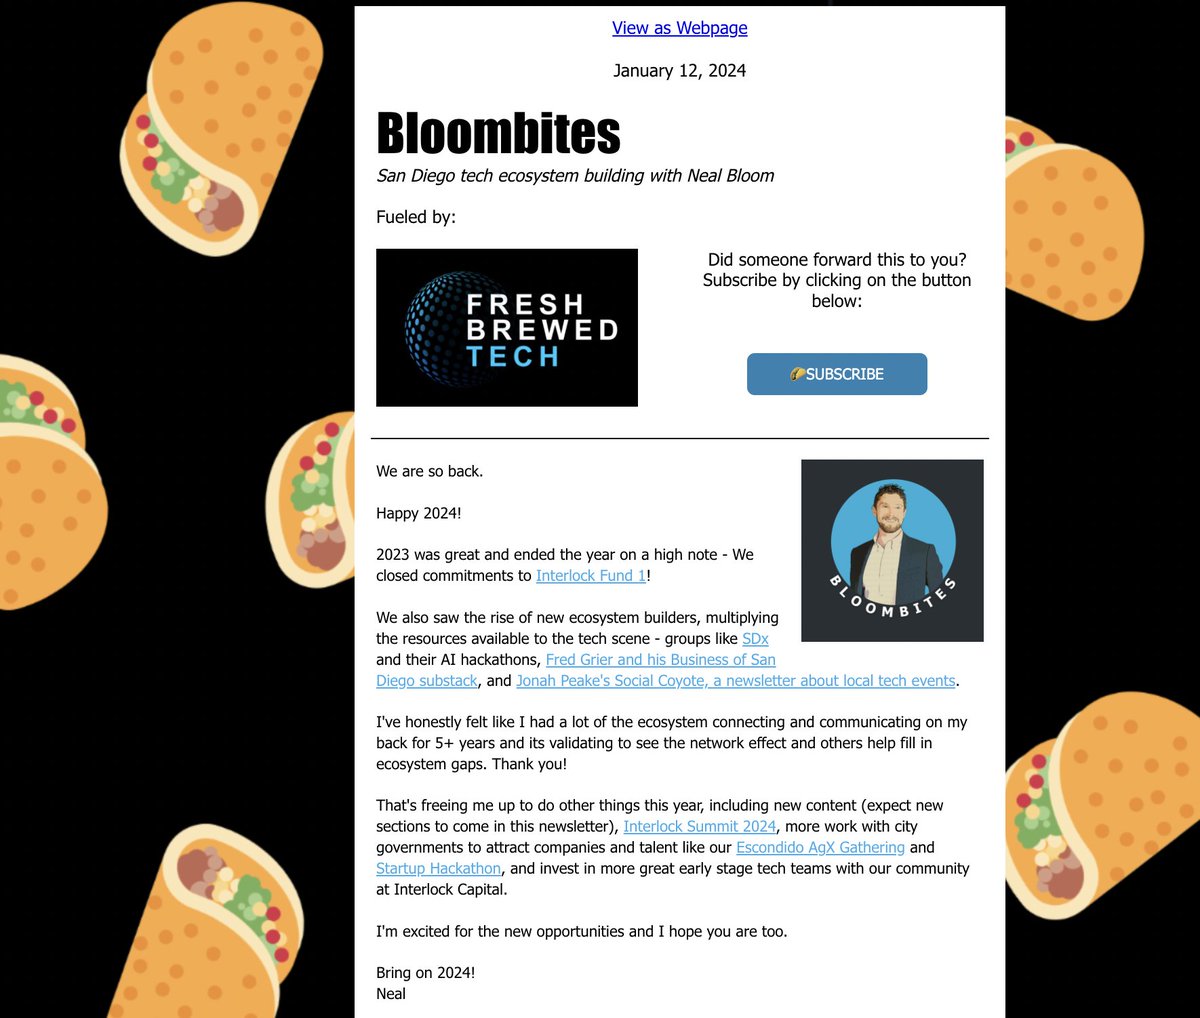 New Bloombites email newsletter by Fresh Brewed Tech is out! Here's a taste and subscribe for the rest. conta.cc/4238ScP